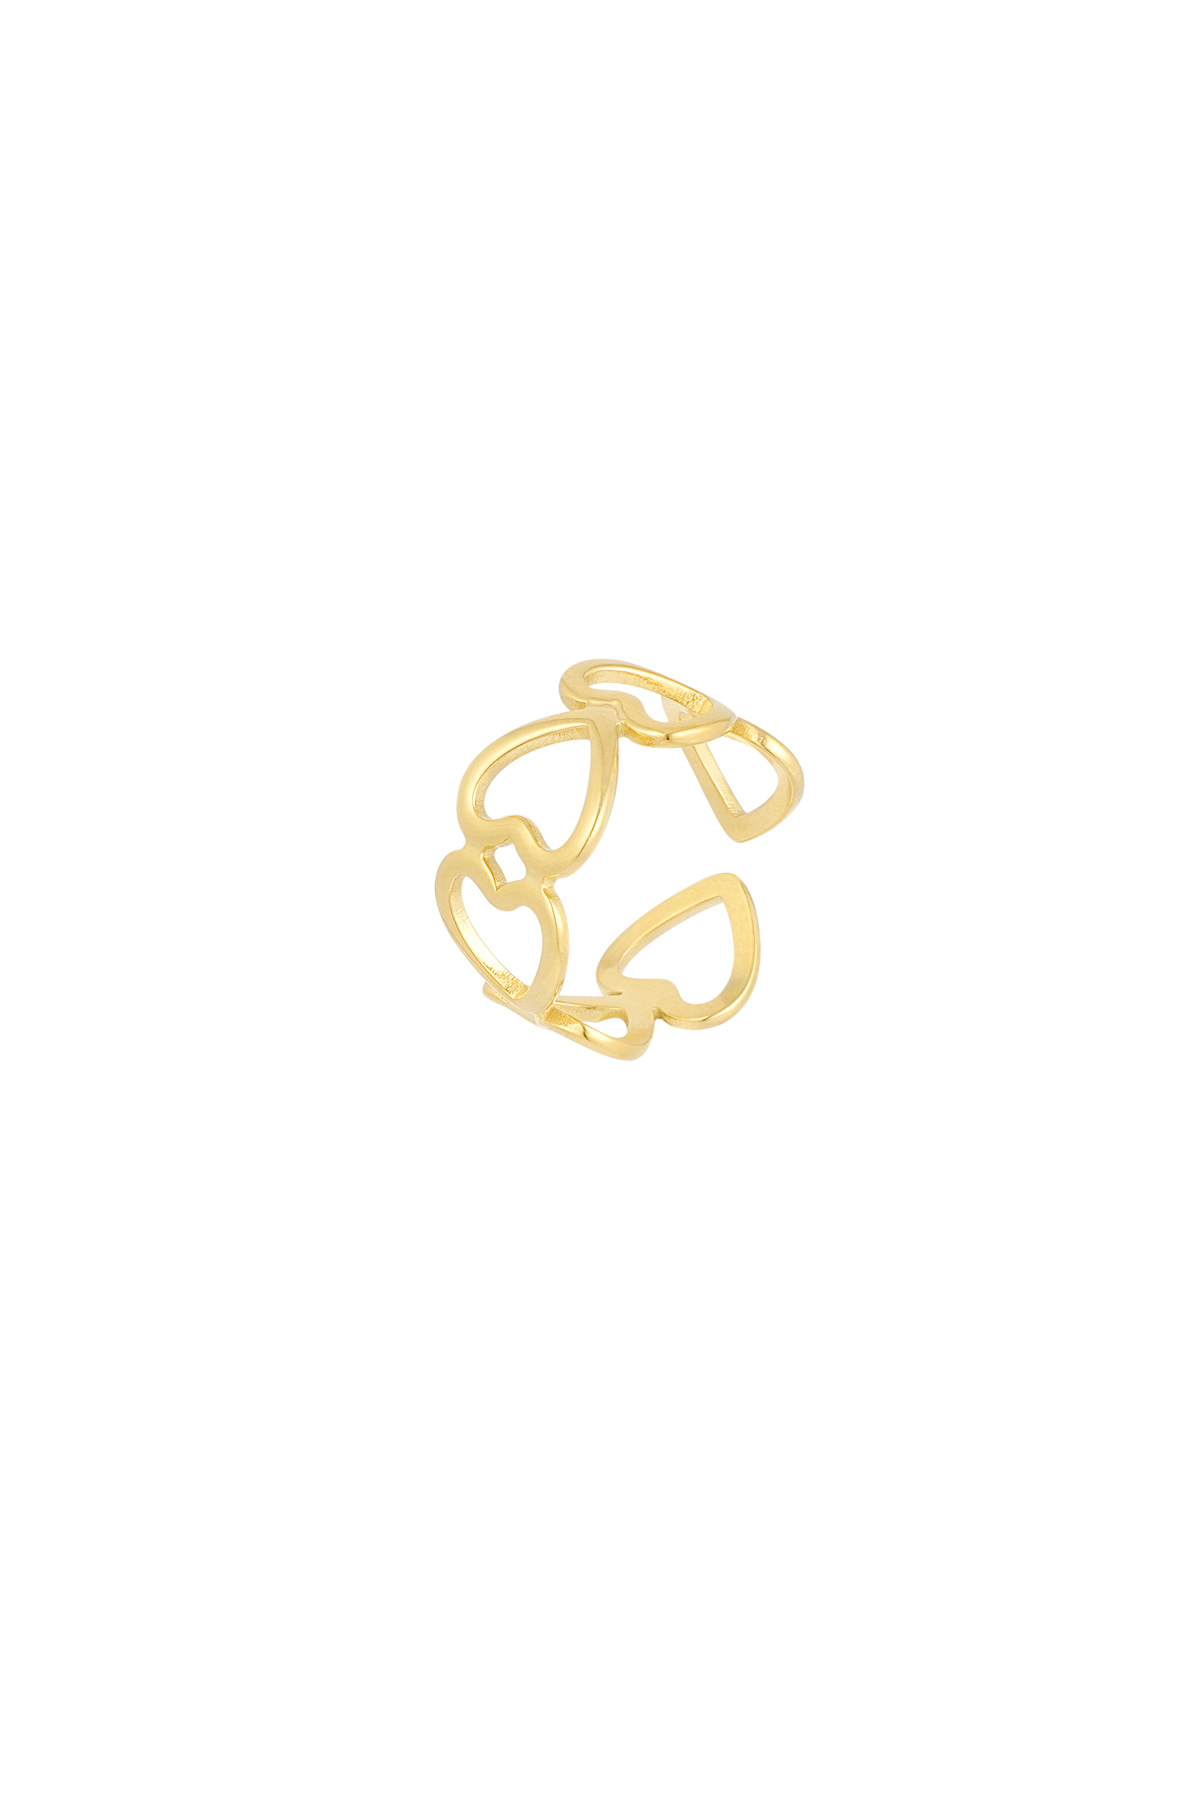 Ring heart connected - gold h5 Picture4